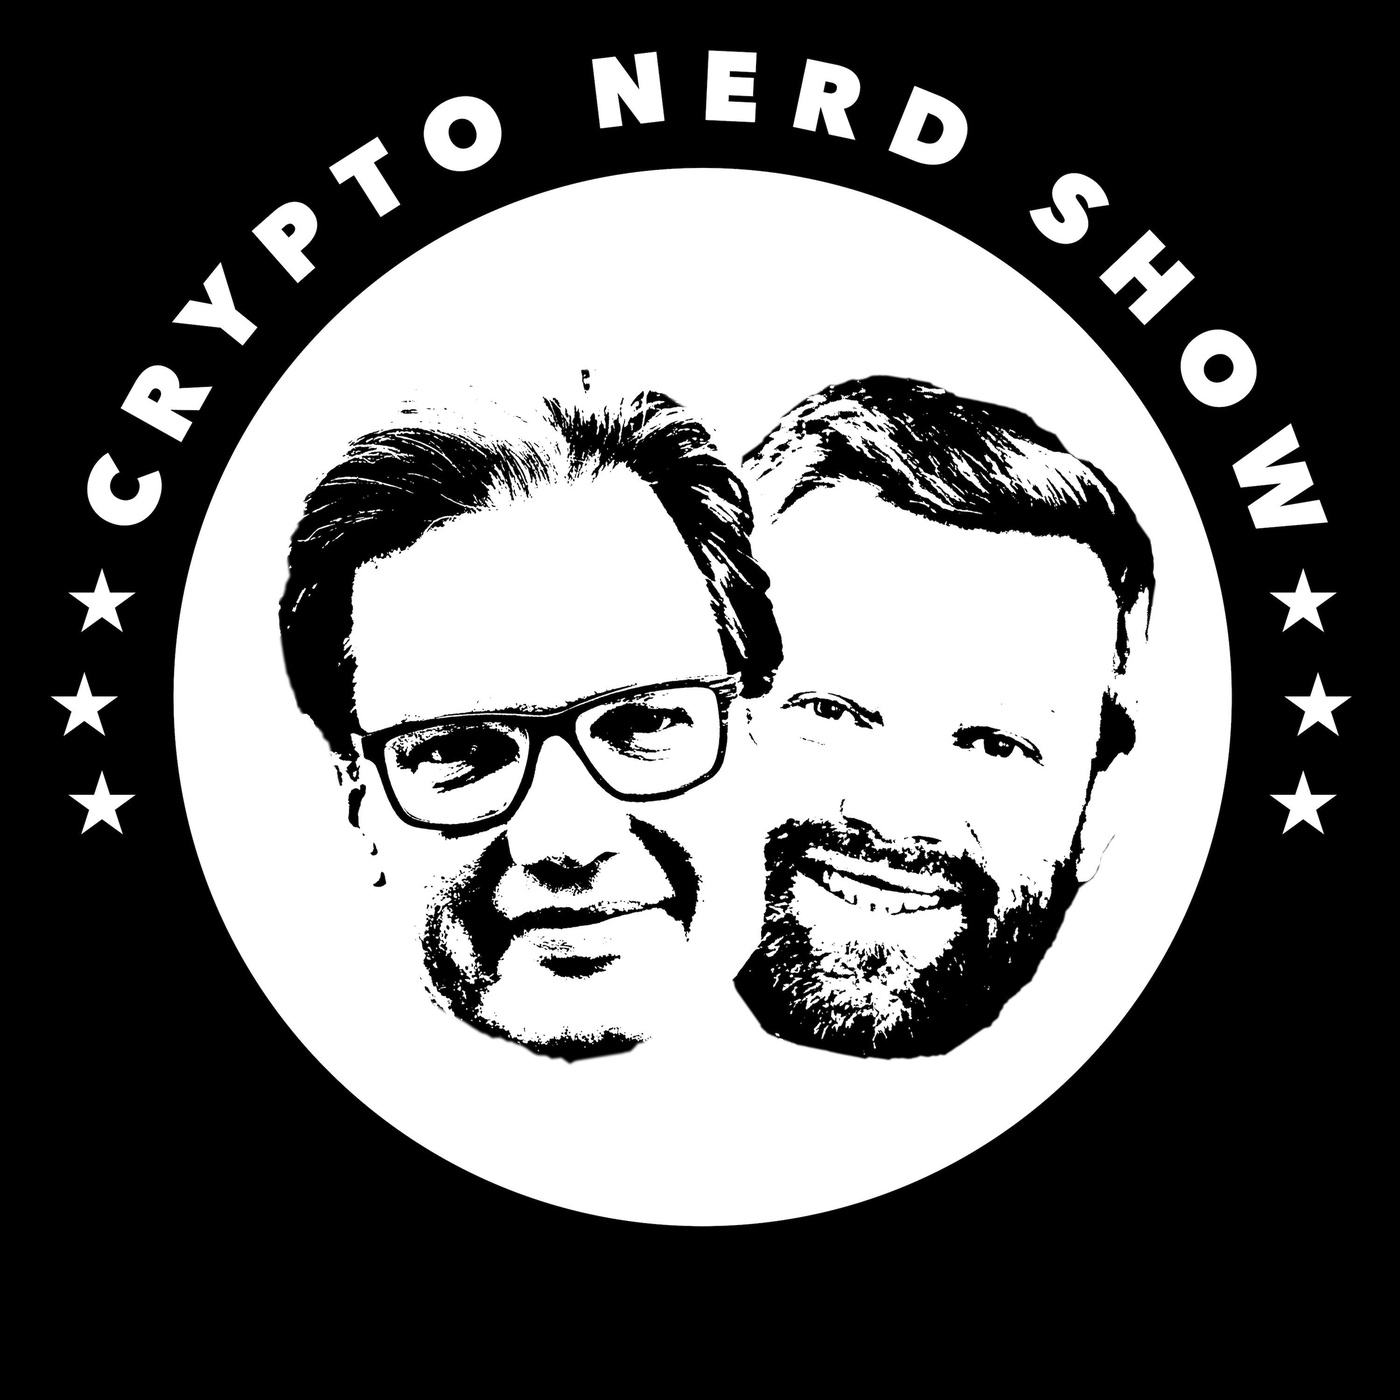 Die Crypto Nerd Show #57 - WE ARE BACK